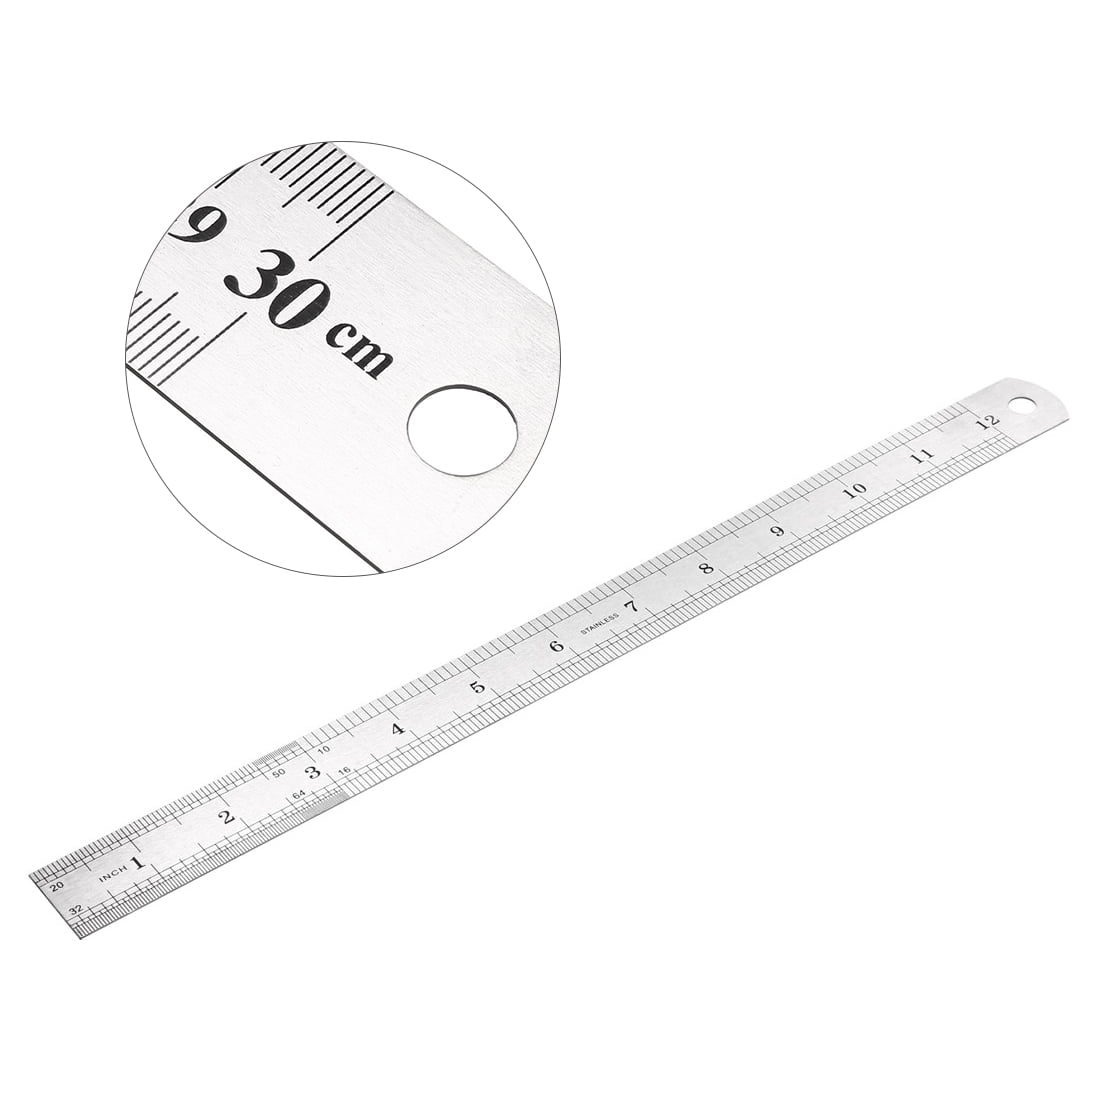 ruler 12 inch/ 30 cm, inches